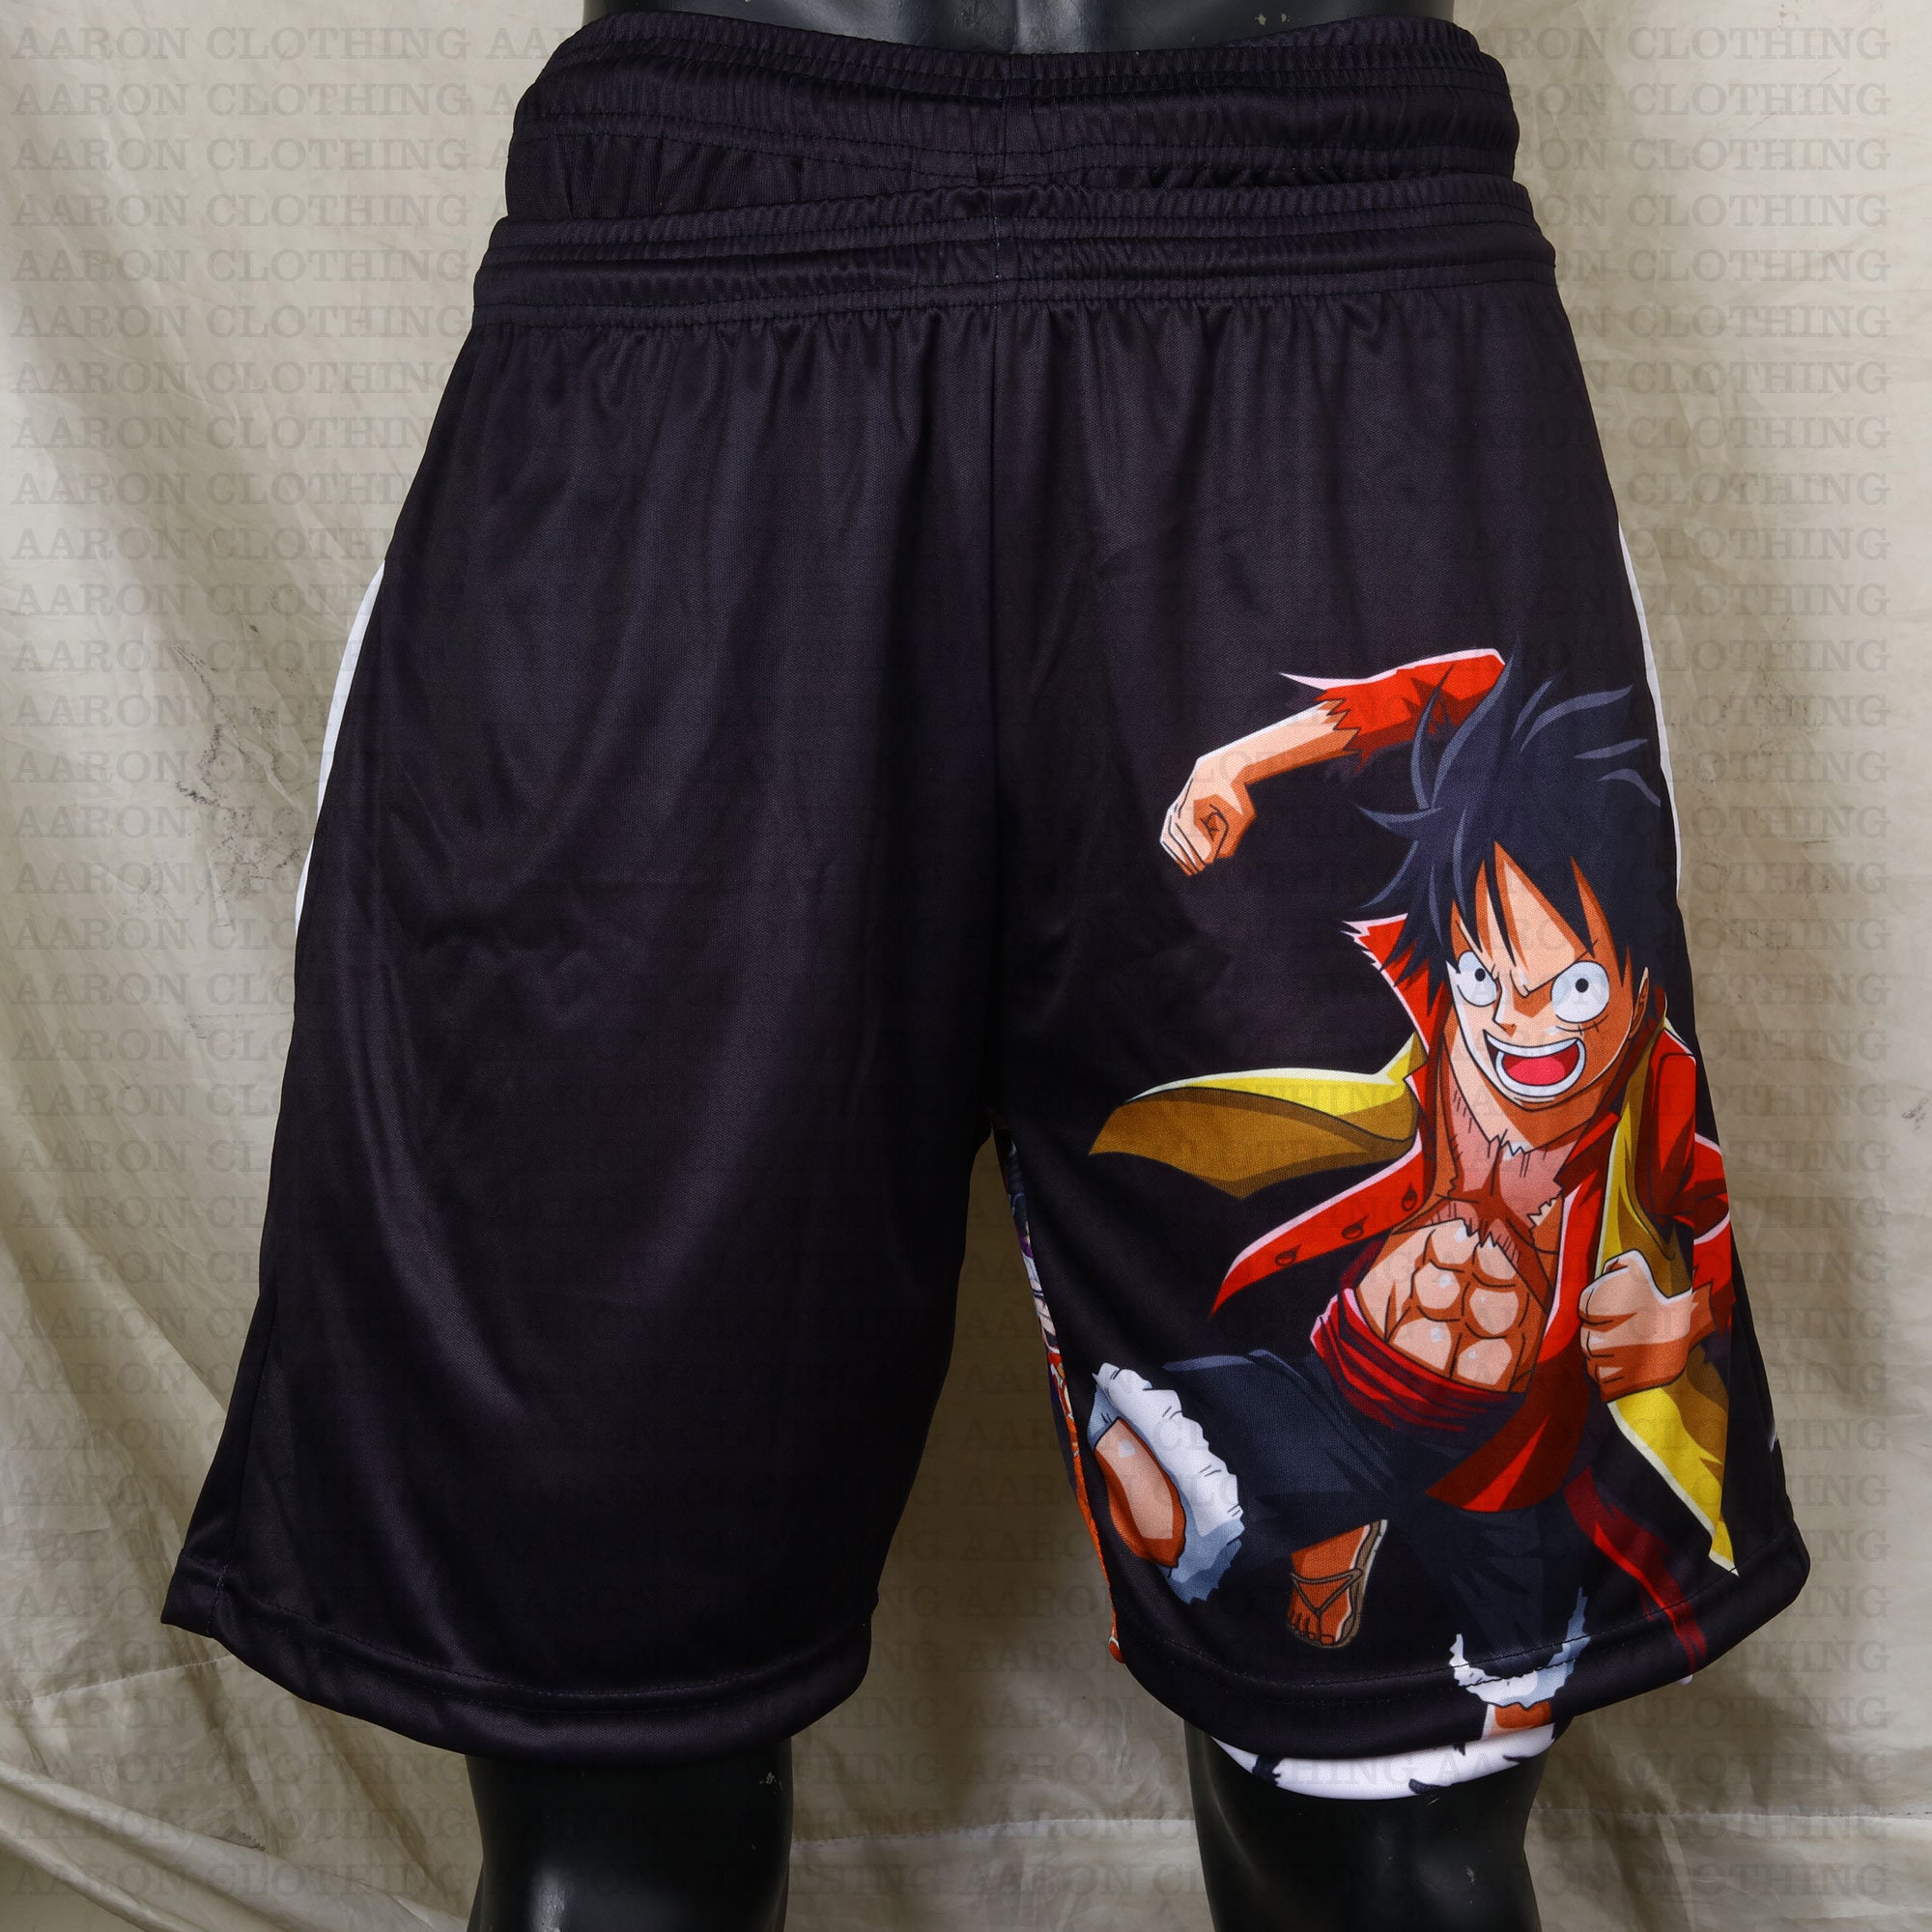 Anime shorts  Buy the best product with free shipping on AliExpress